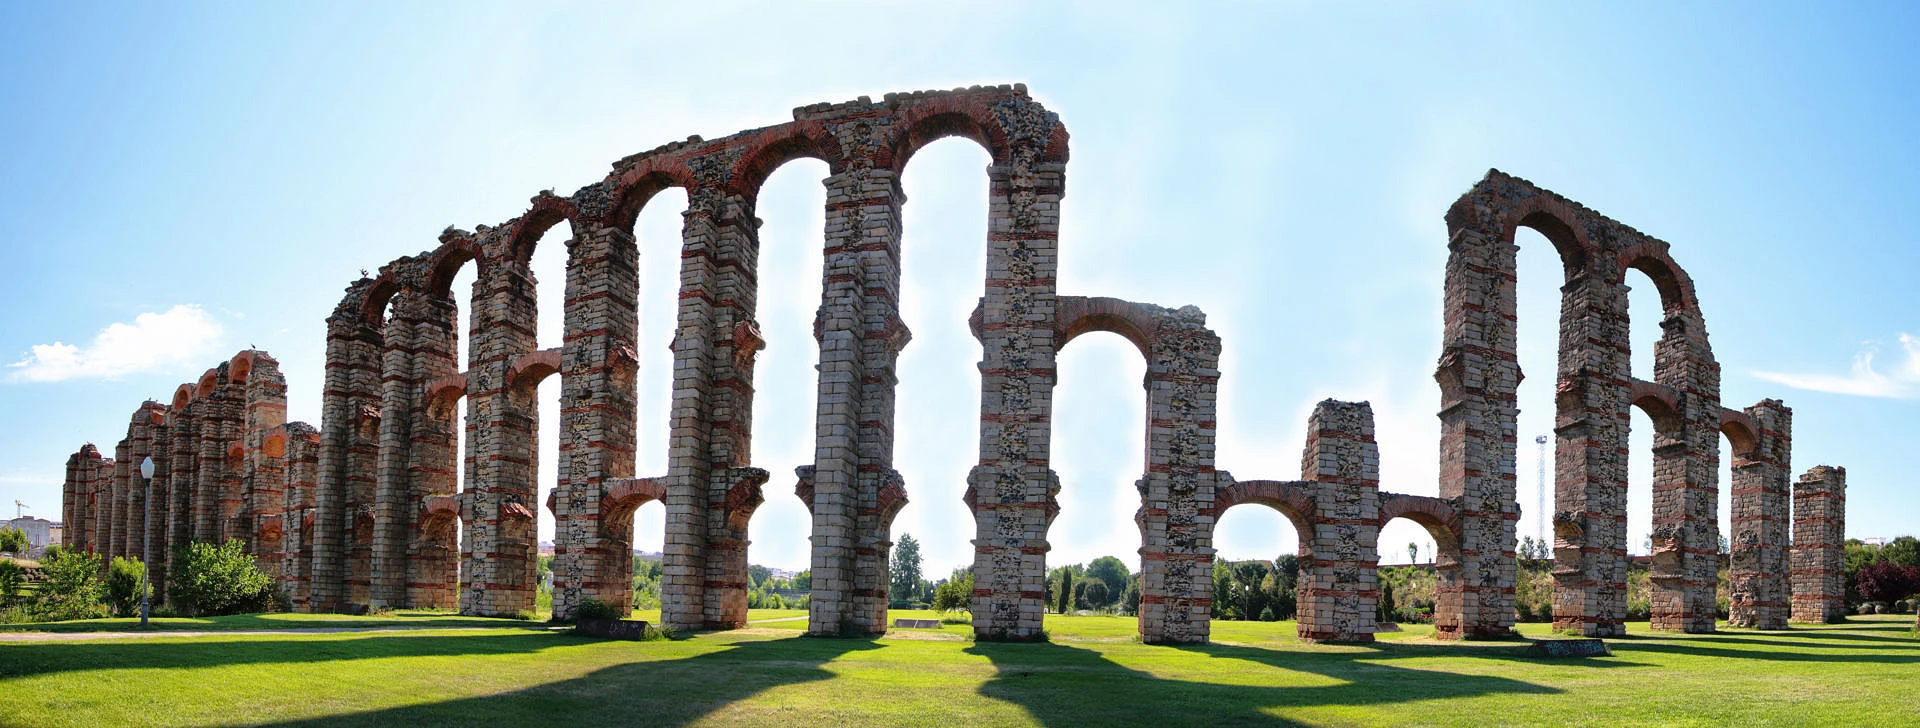 Aqueduct of the Miracles